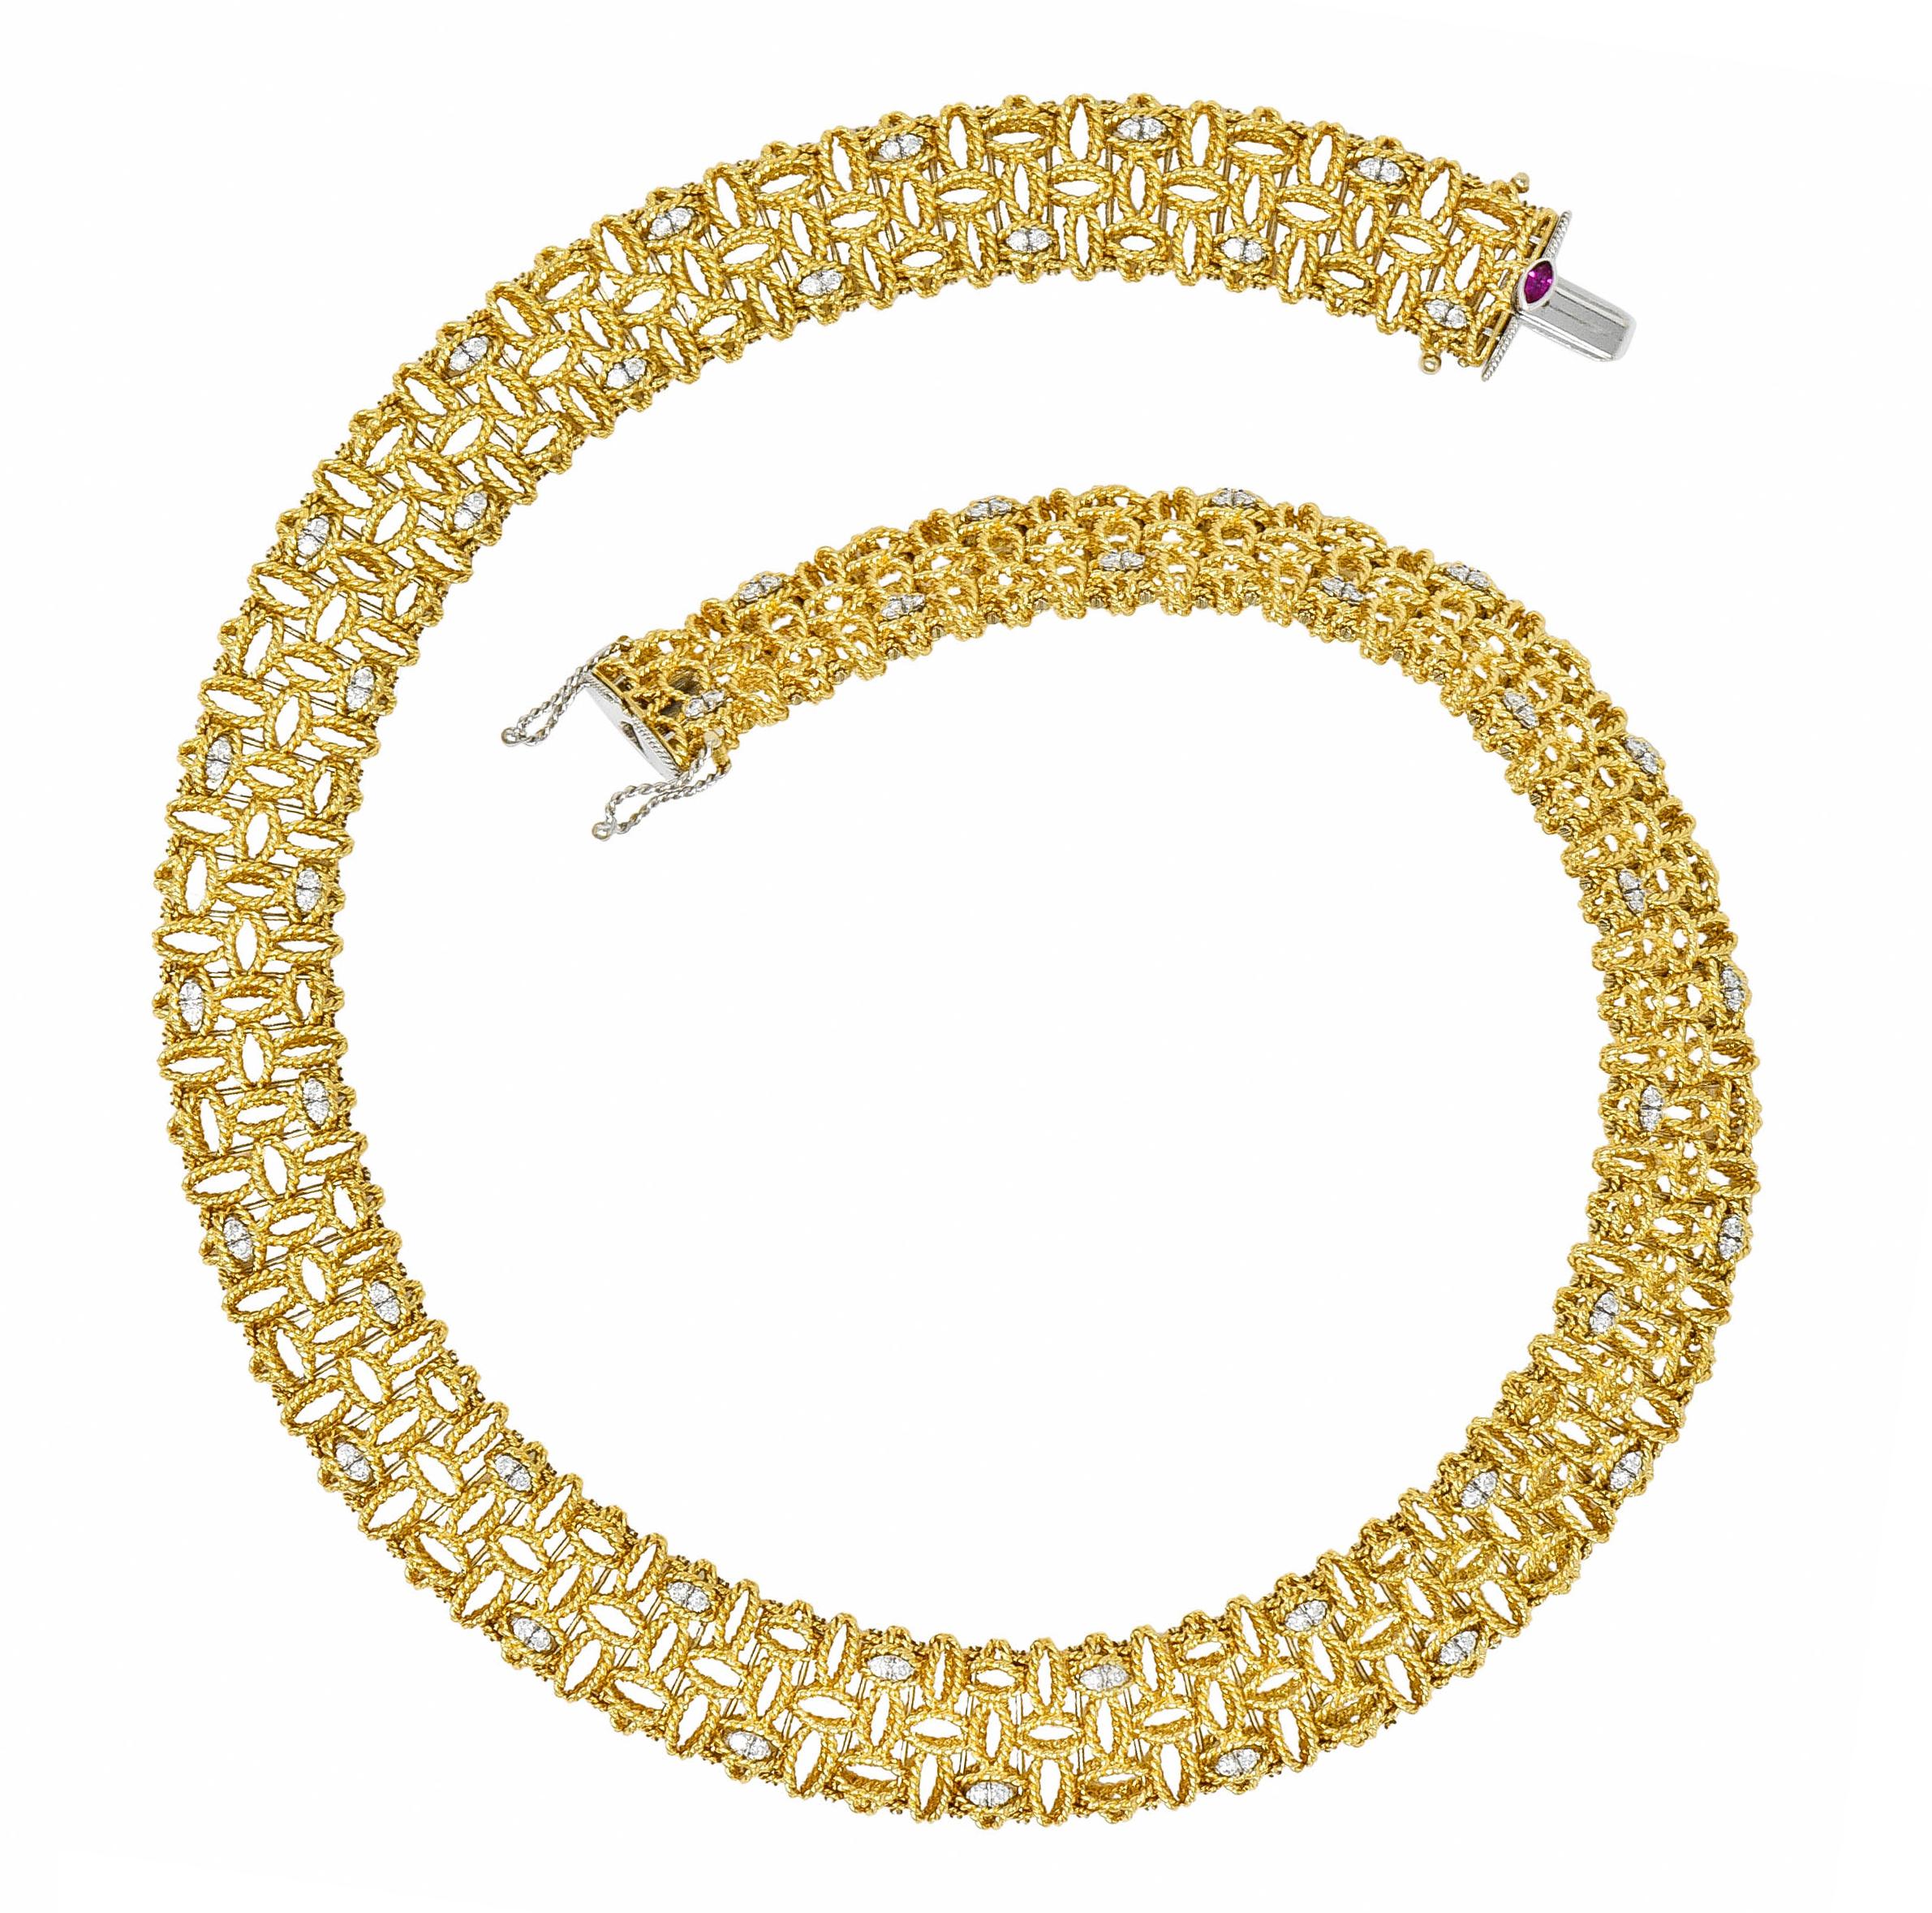 Collar style necklace has abstracted petal forms derived from Roberto Coin's iconic Princess Flower design

Lightweight, malleable, and comprised of a twisted rope motif

Accented throughout by round brilliant cut diamonds weighing in total